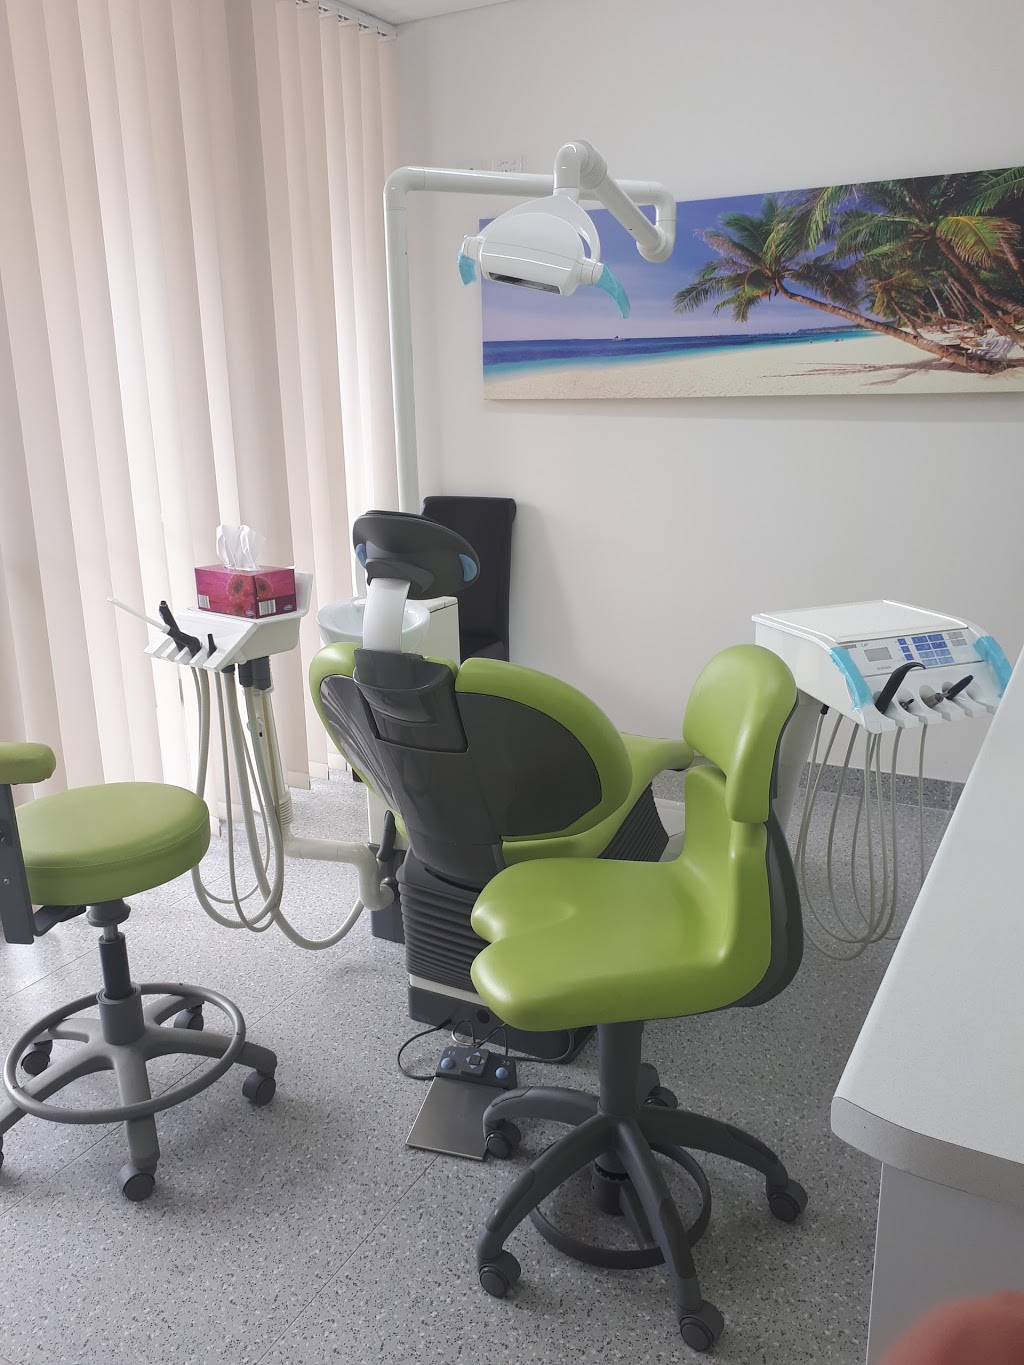 Top Ryde Dentists | dentist | 7/11 Smith St, Ryde NSW 2112, Australia | 0298093778 OR +61 2 9809 3778